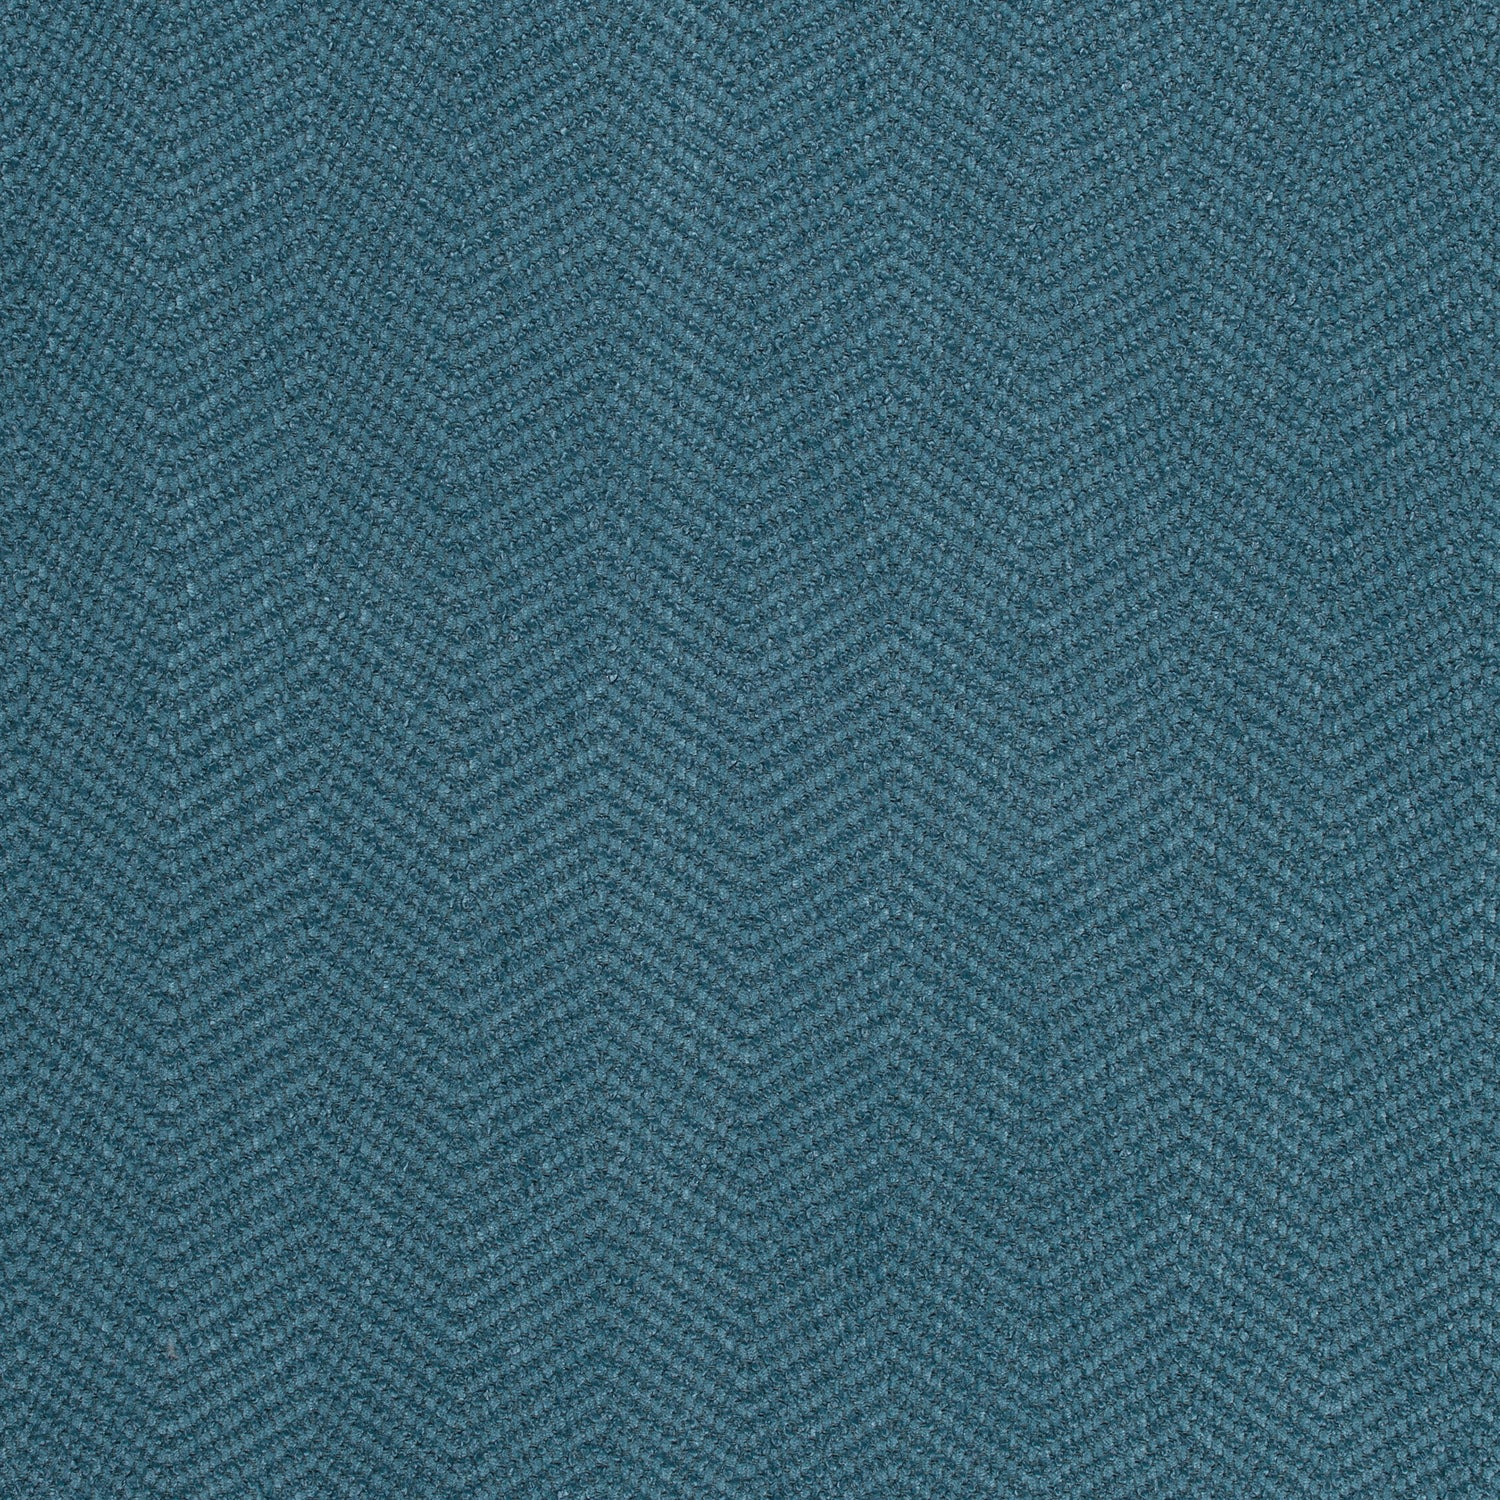 Dalton Herringbone fabric in peacock color - pattern number W80628 - by Thibaut in the Pinnacle collection